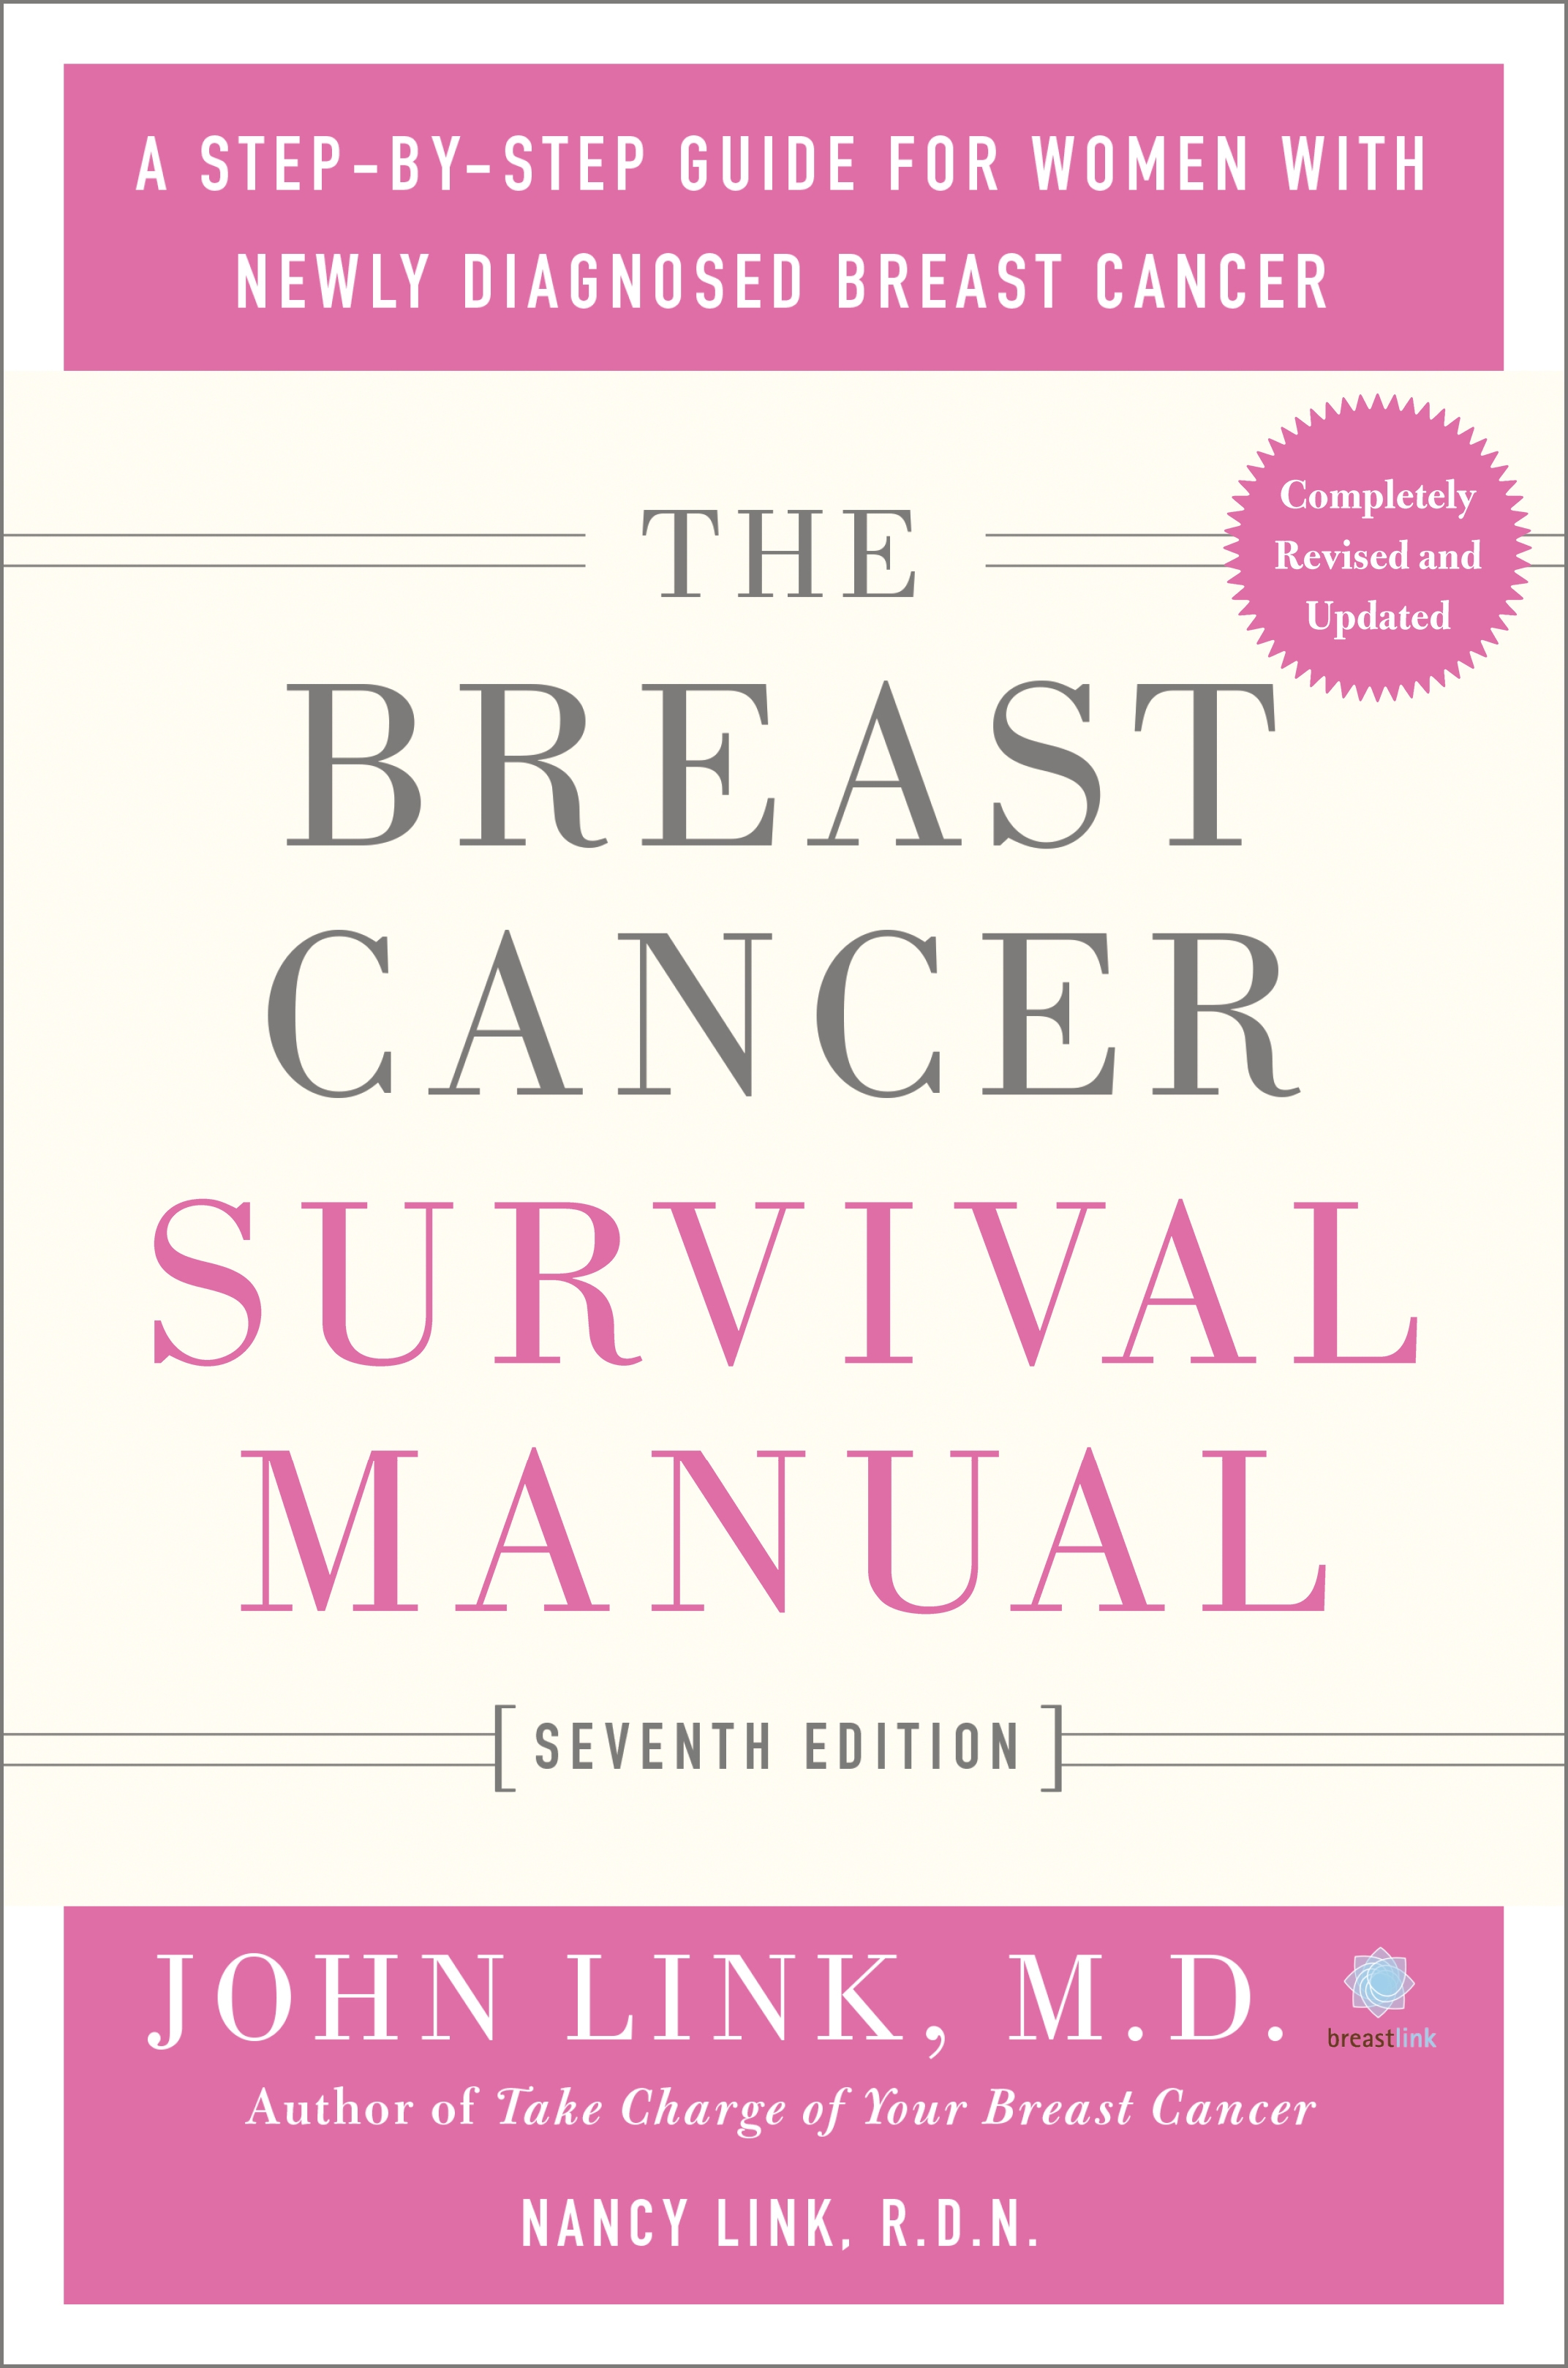 The Breast Cancer Survival Manual, Seventh Edition A Step-by-Step Guide for Women with Newly Diagnosed Breast Cancer cover image